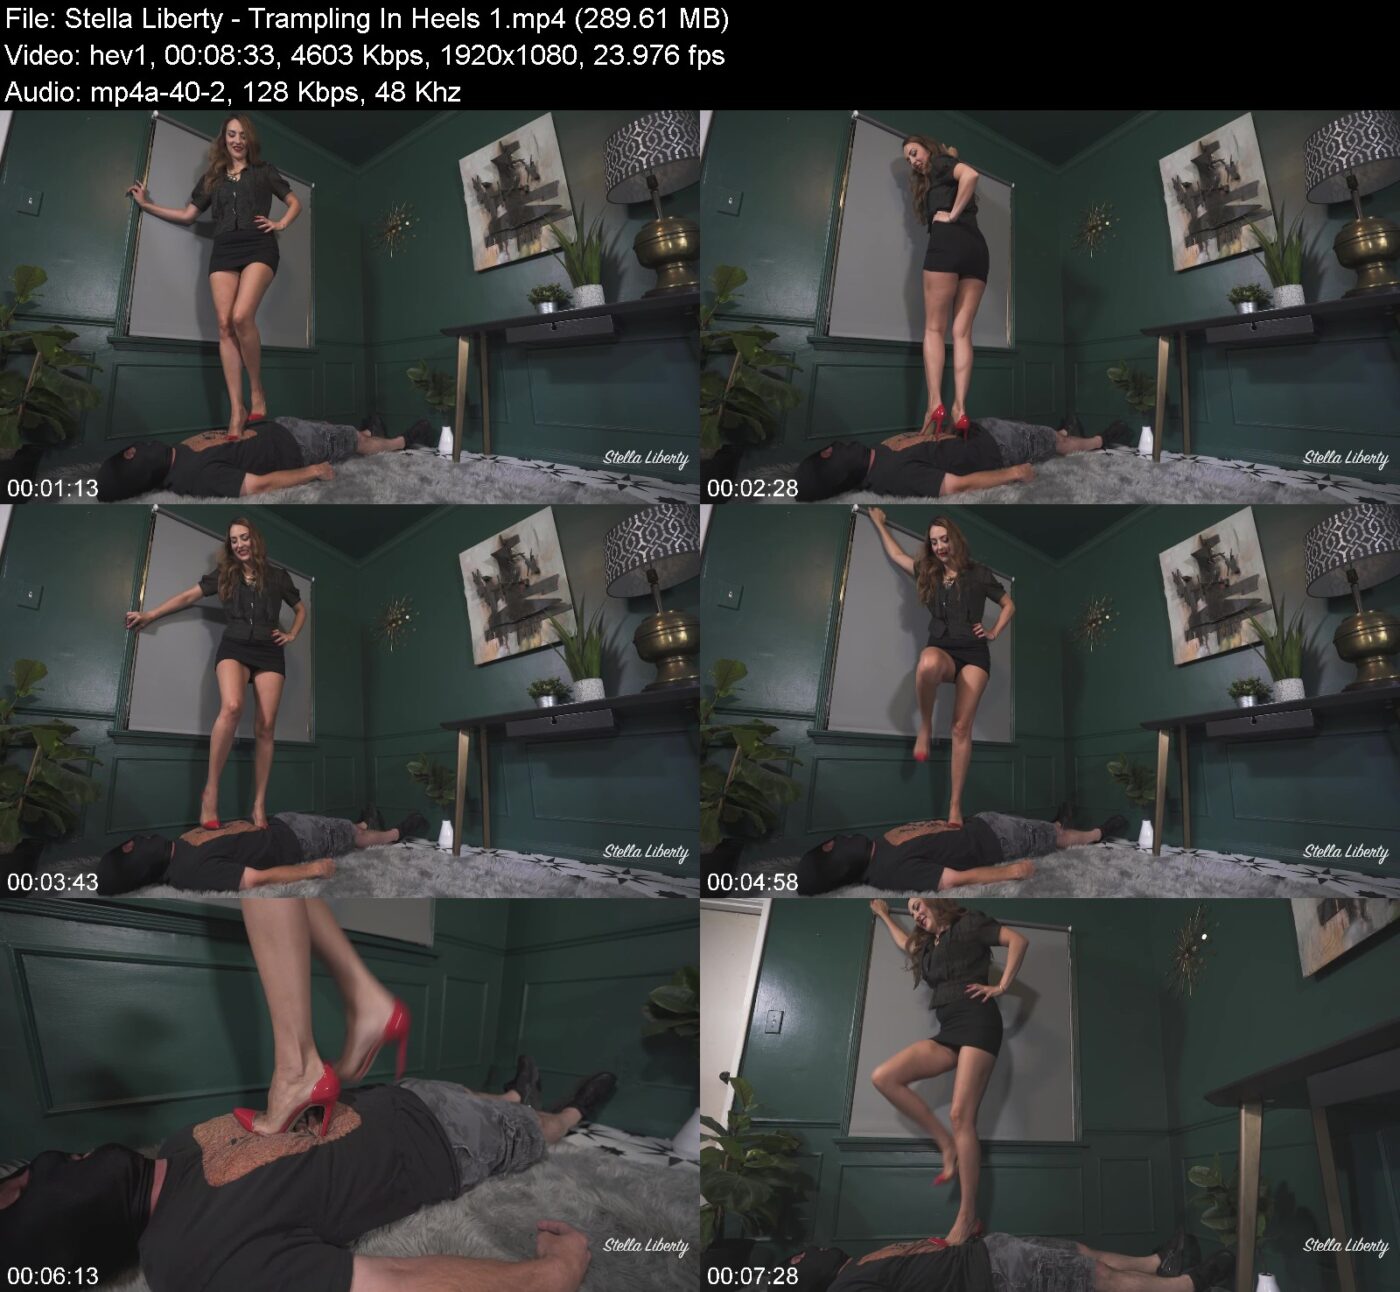 Actress: Stella Liberty. Title and Studio: Trampling In Heels 1